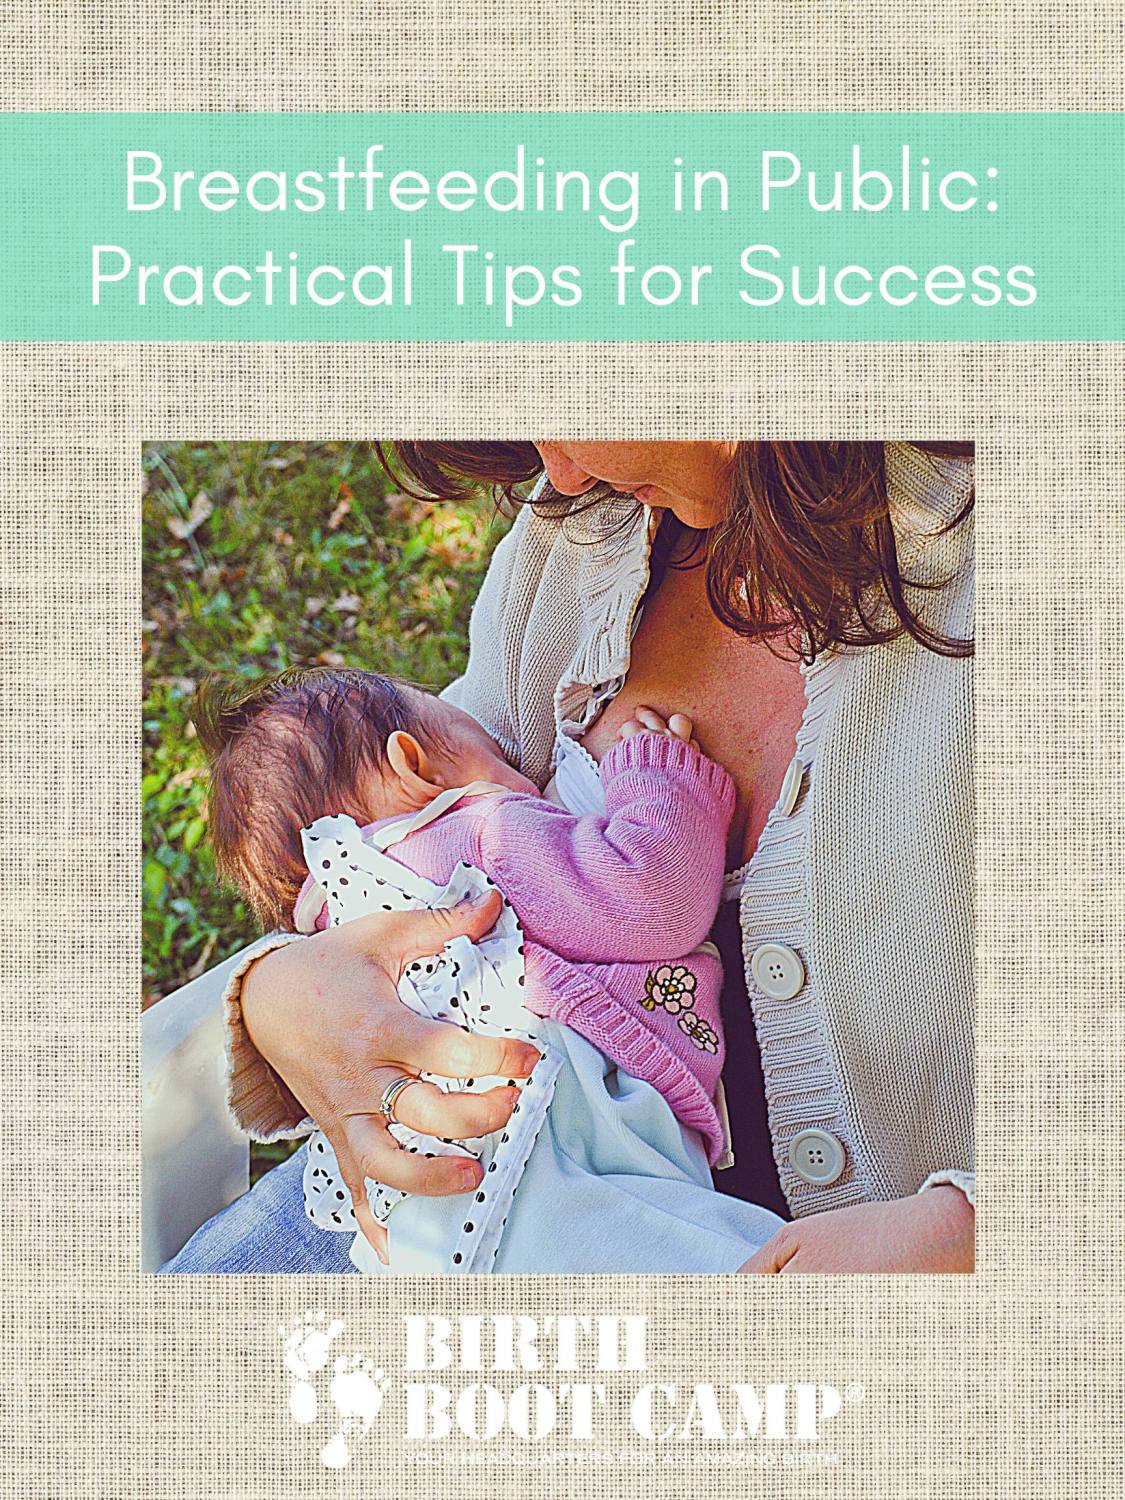 Breastfeeding in Public: Practical Tips for Success